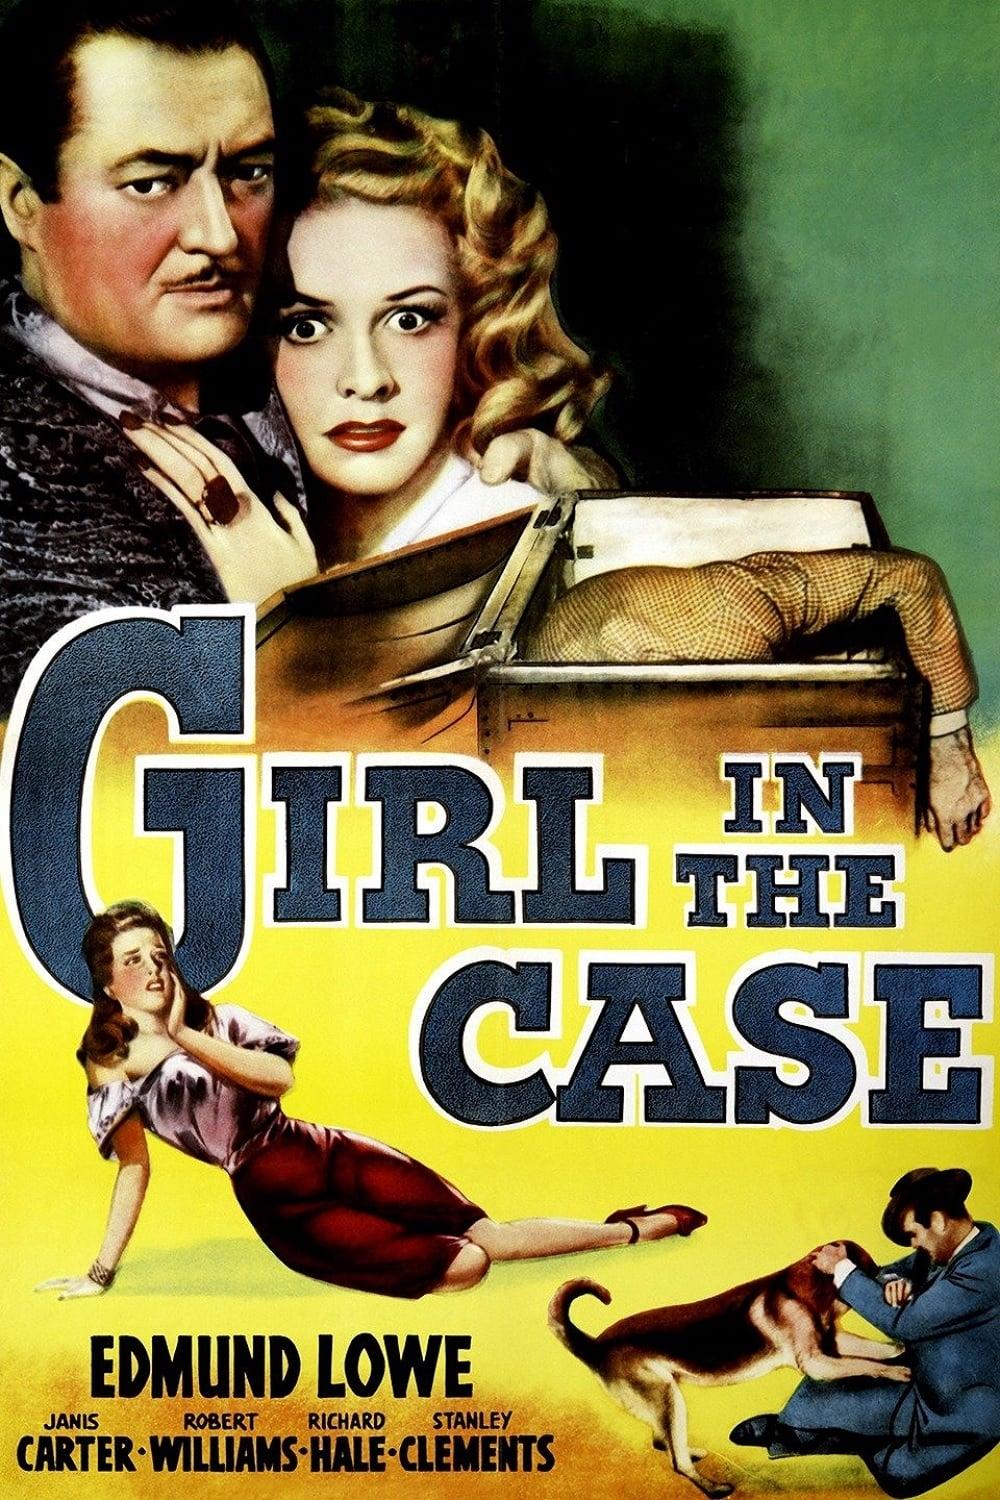 The Girl in the Case poster